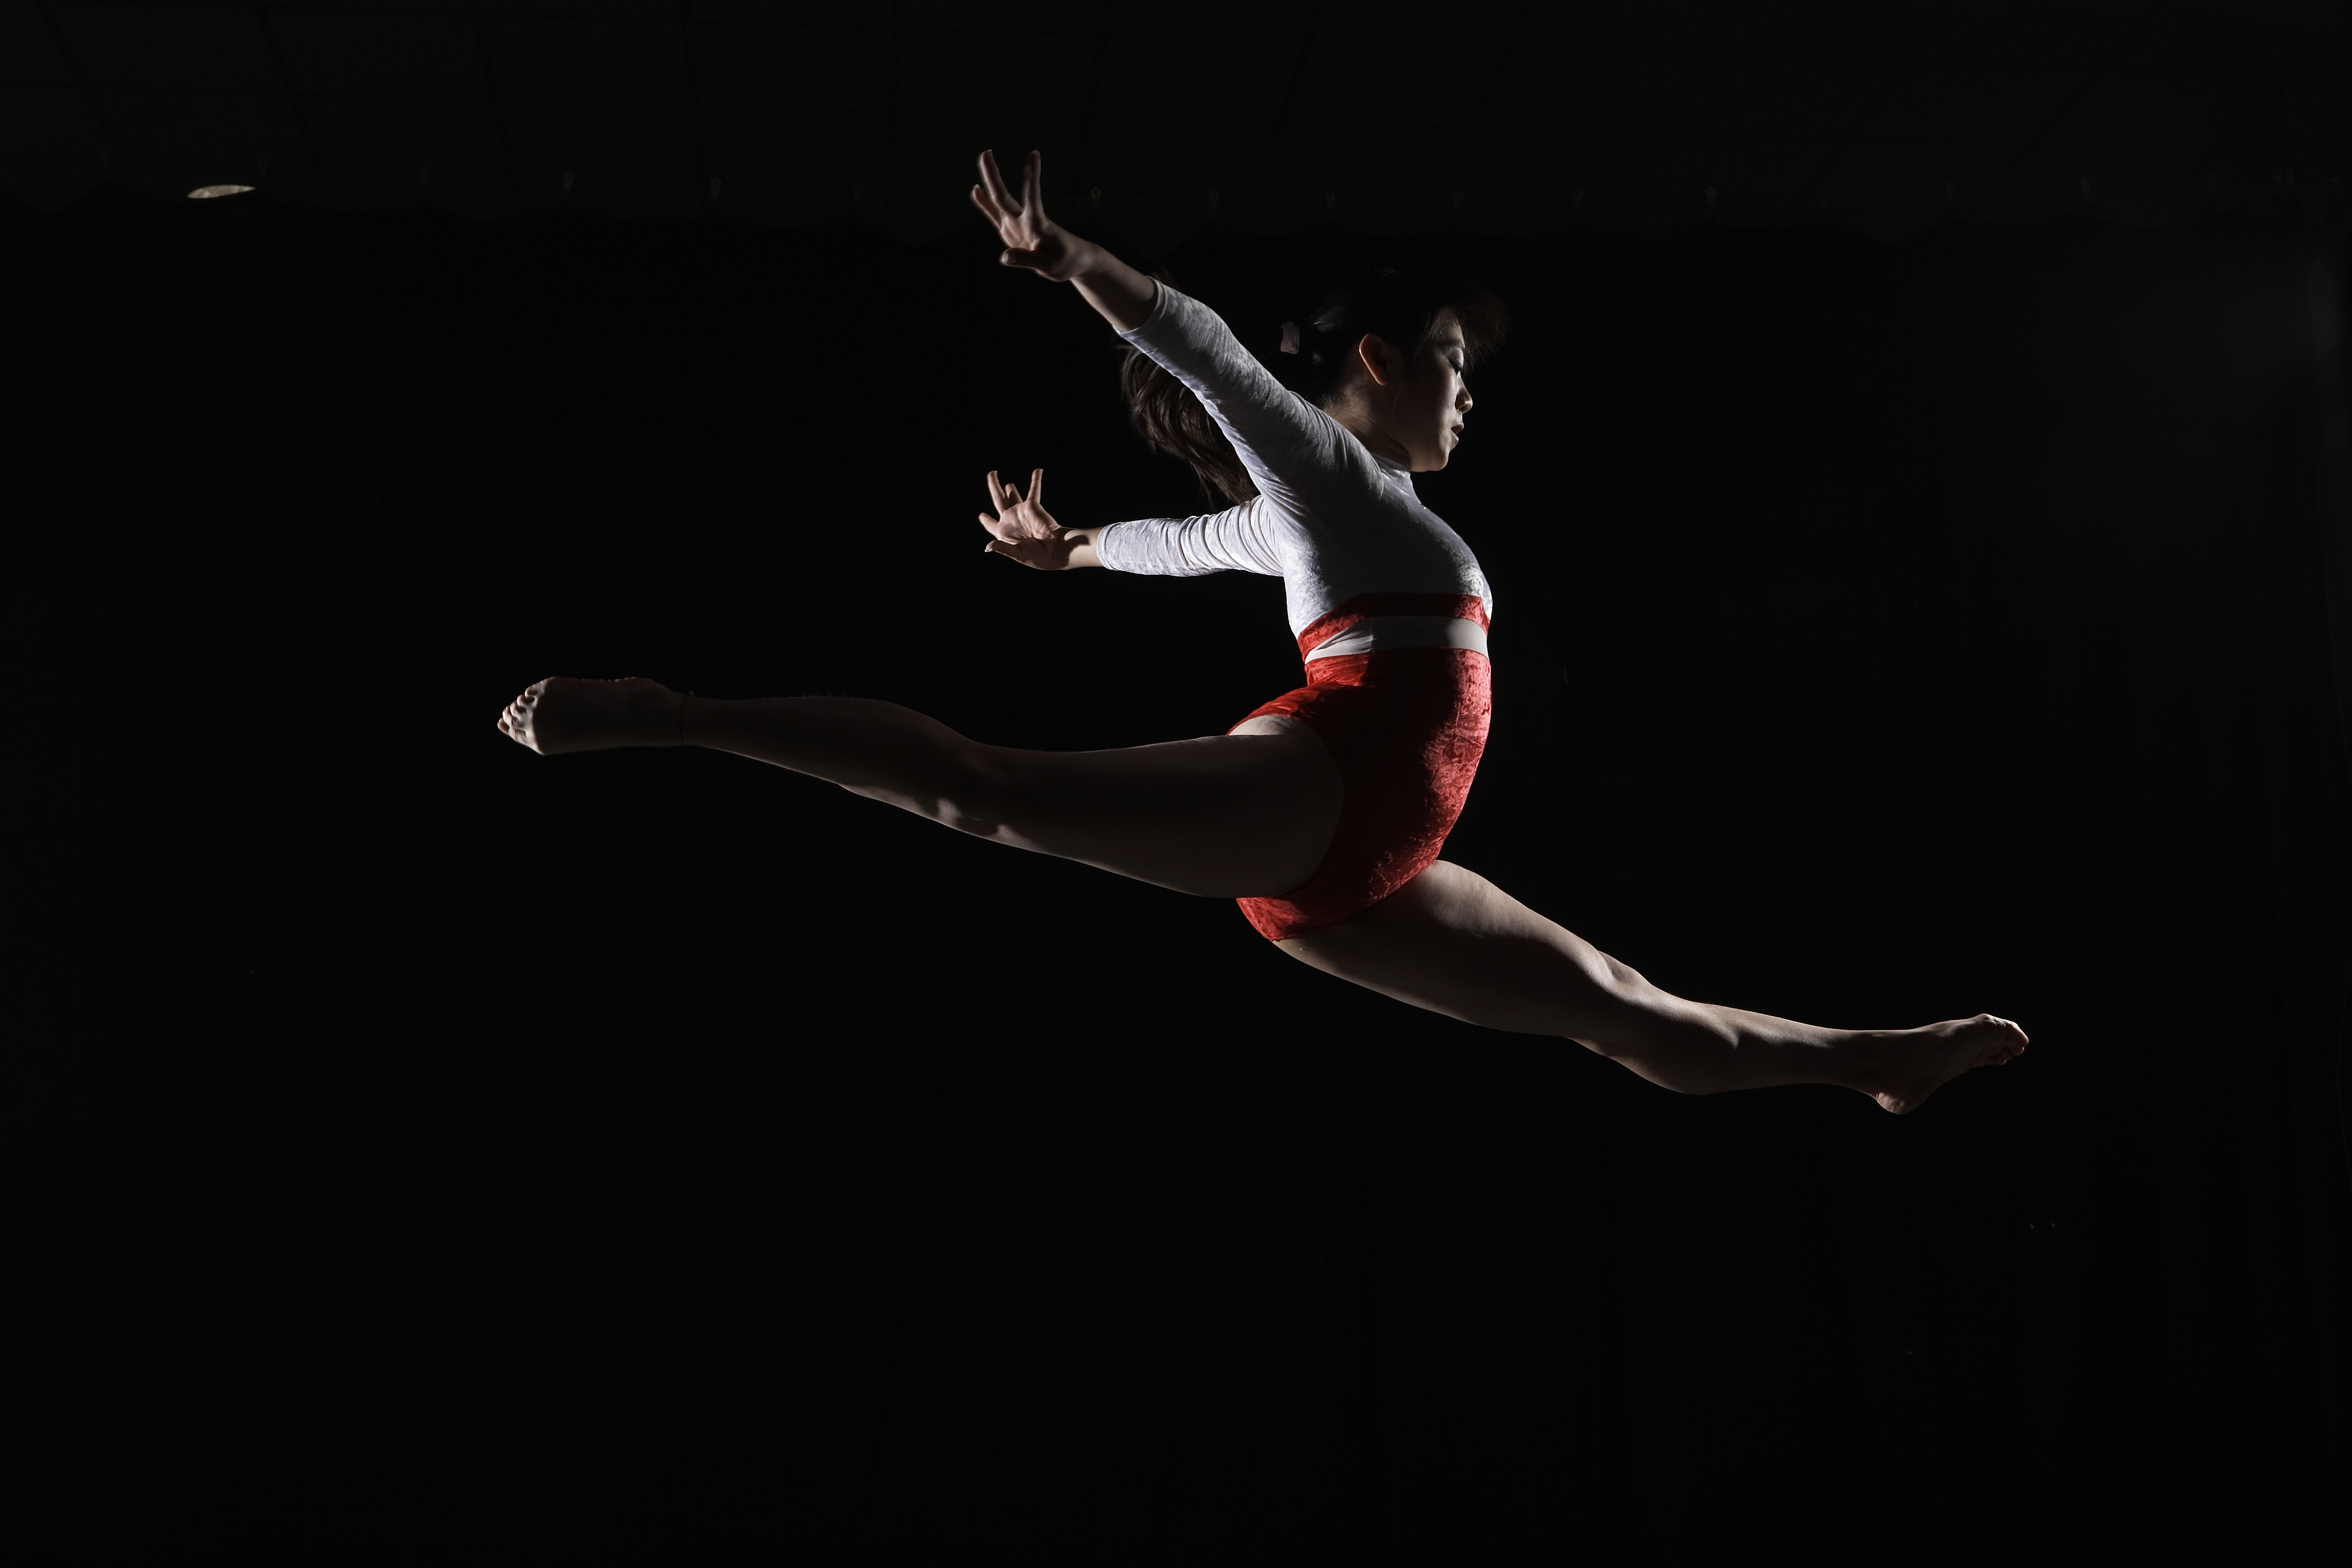 Young female gymnast leaping in mid-air, arms outstretched, side view. Female with dark brown hair and a red and white gymnastics uniform.